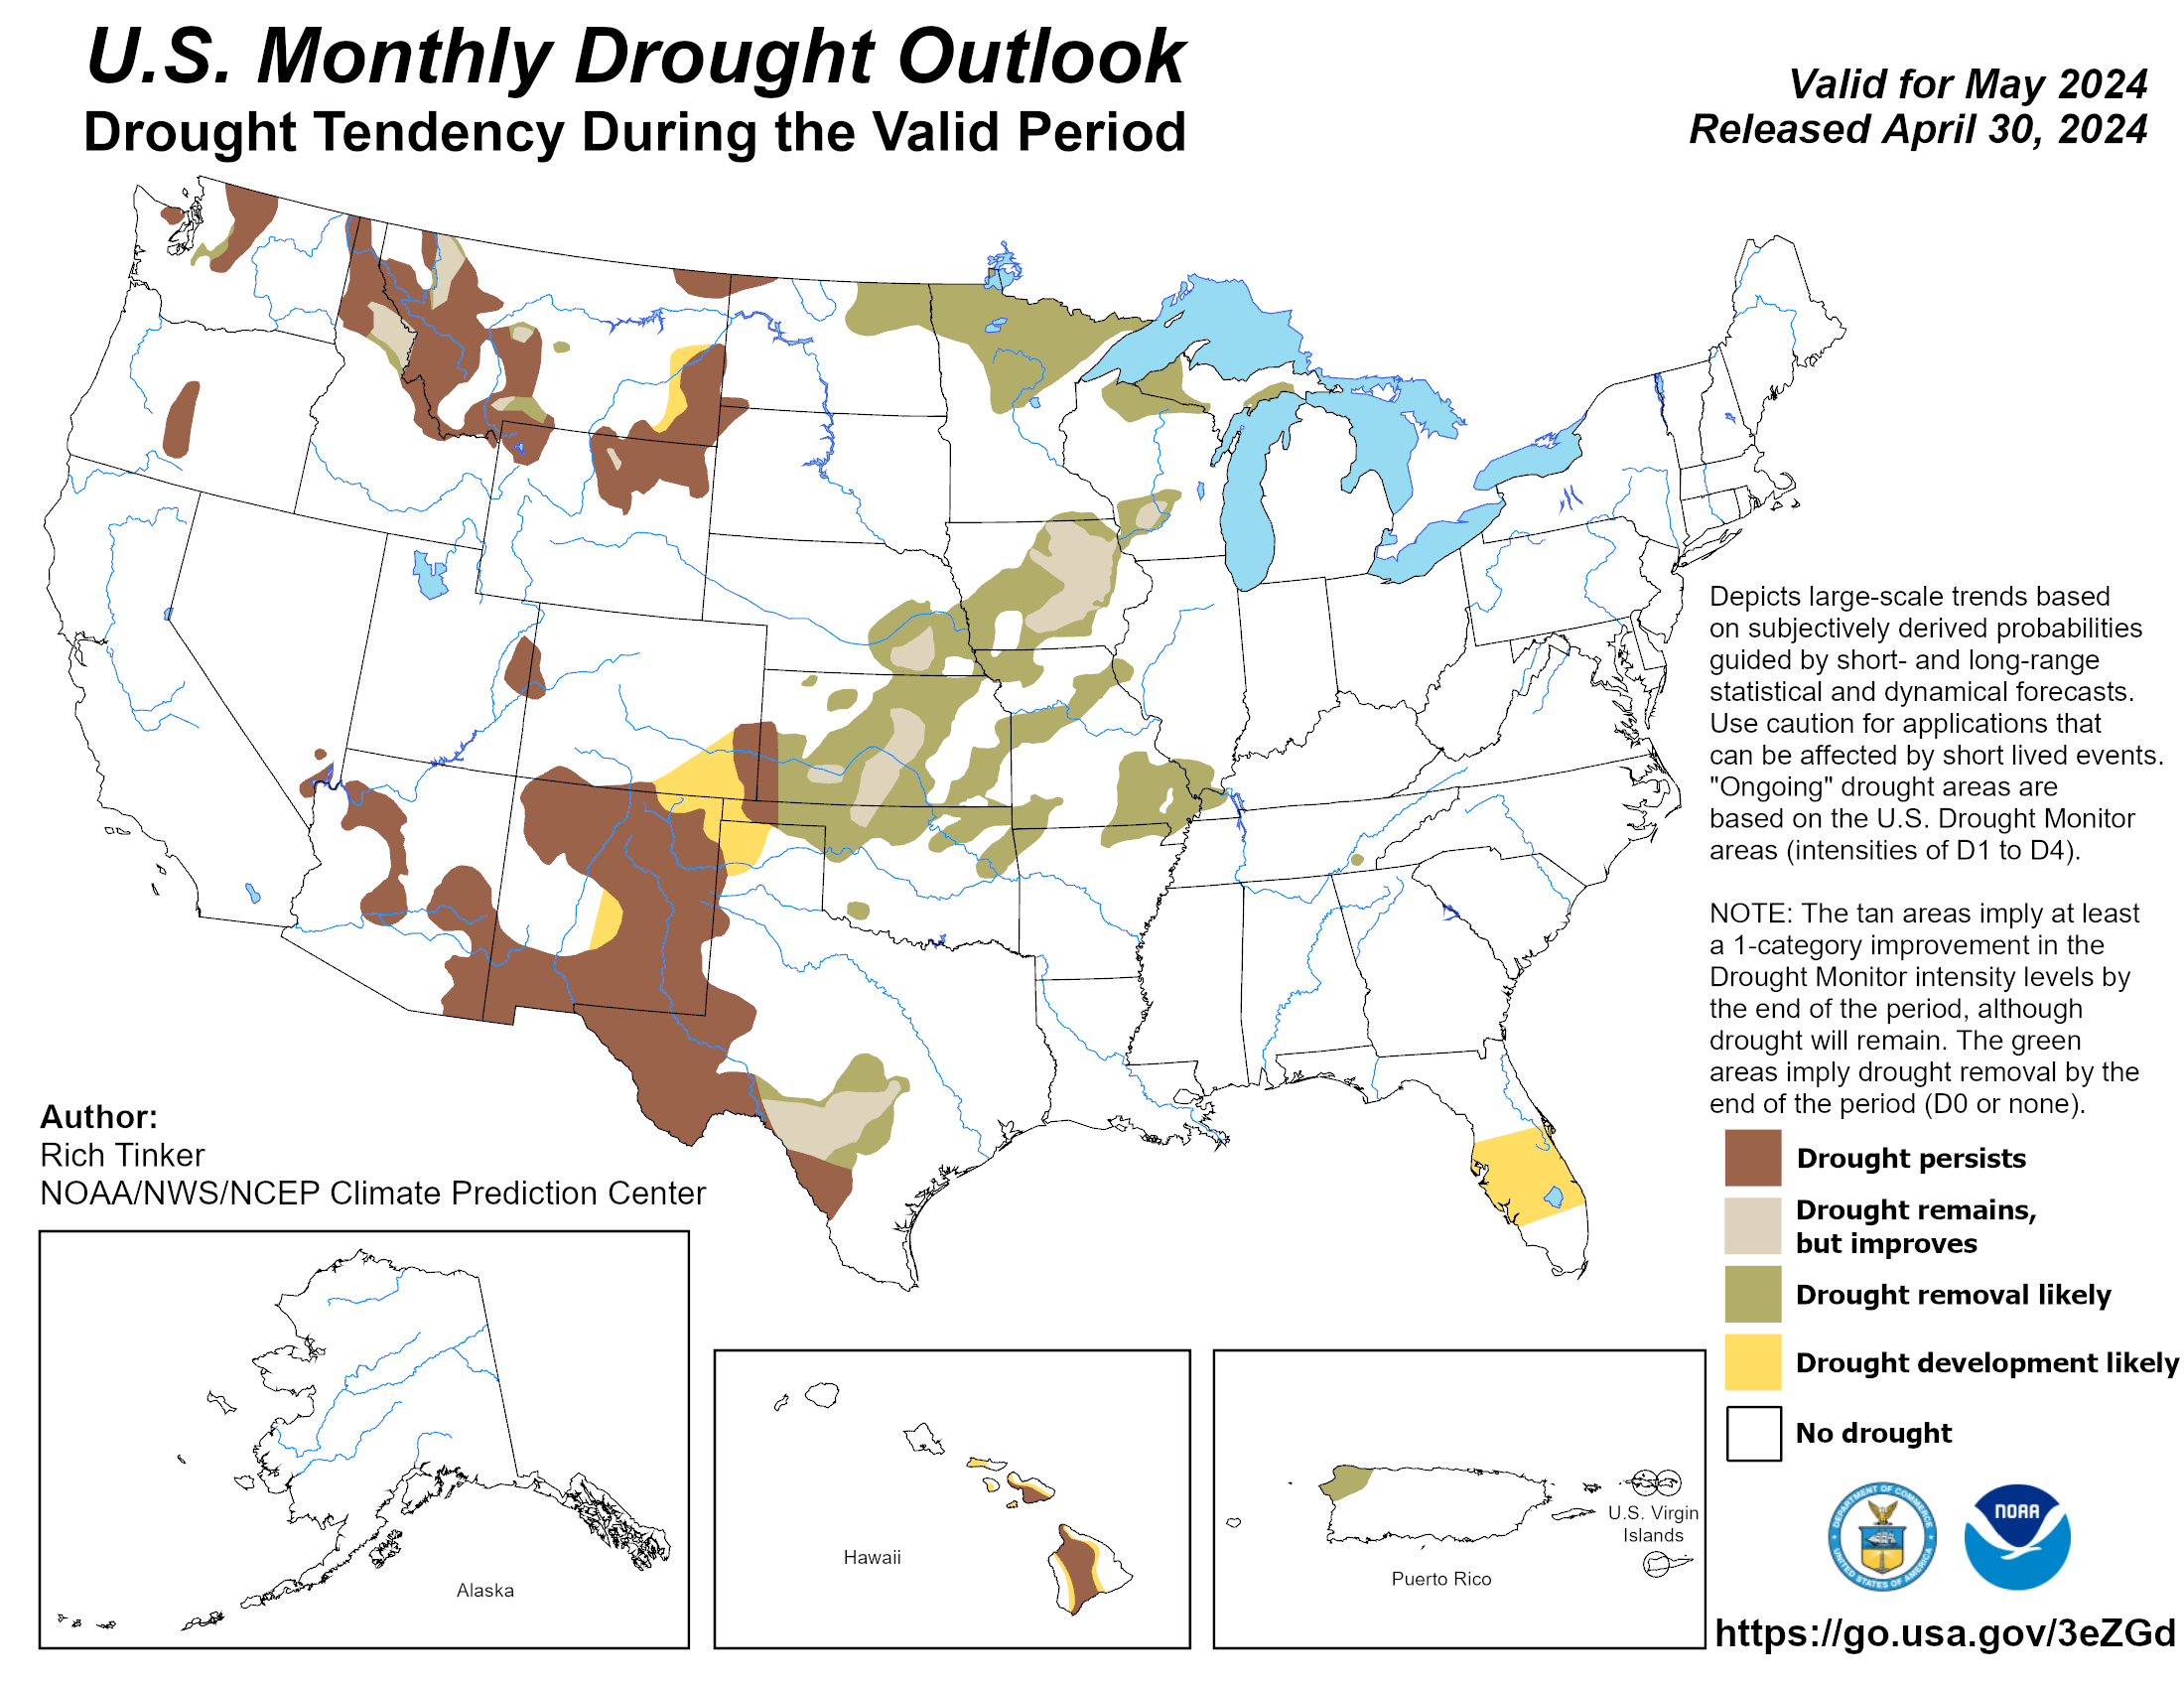 U.S. Monthly Drought Outlook - Click to Enlarge